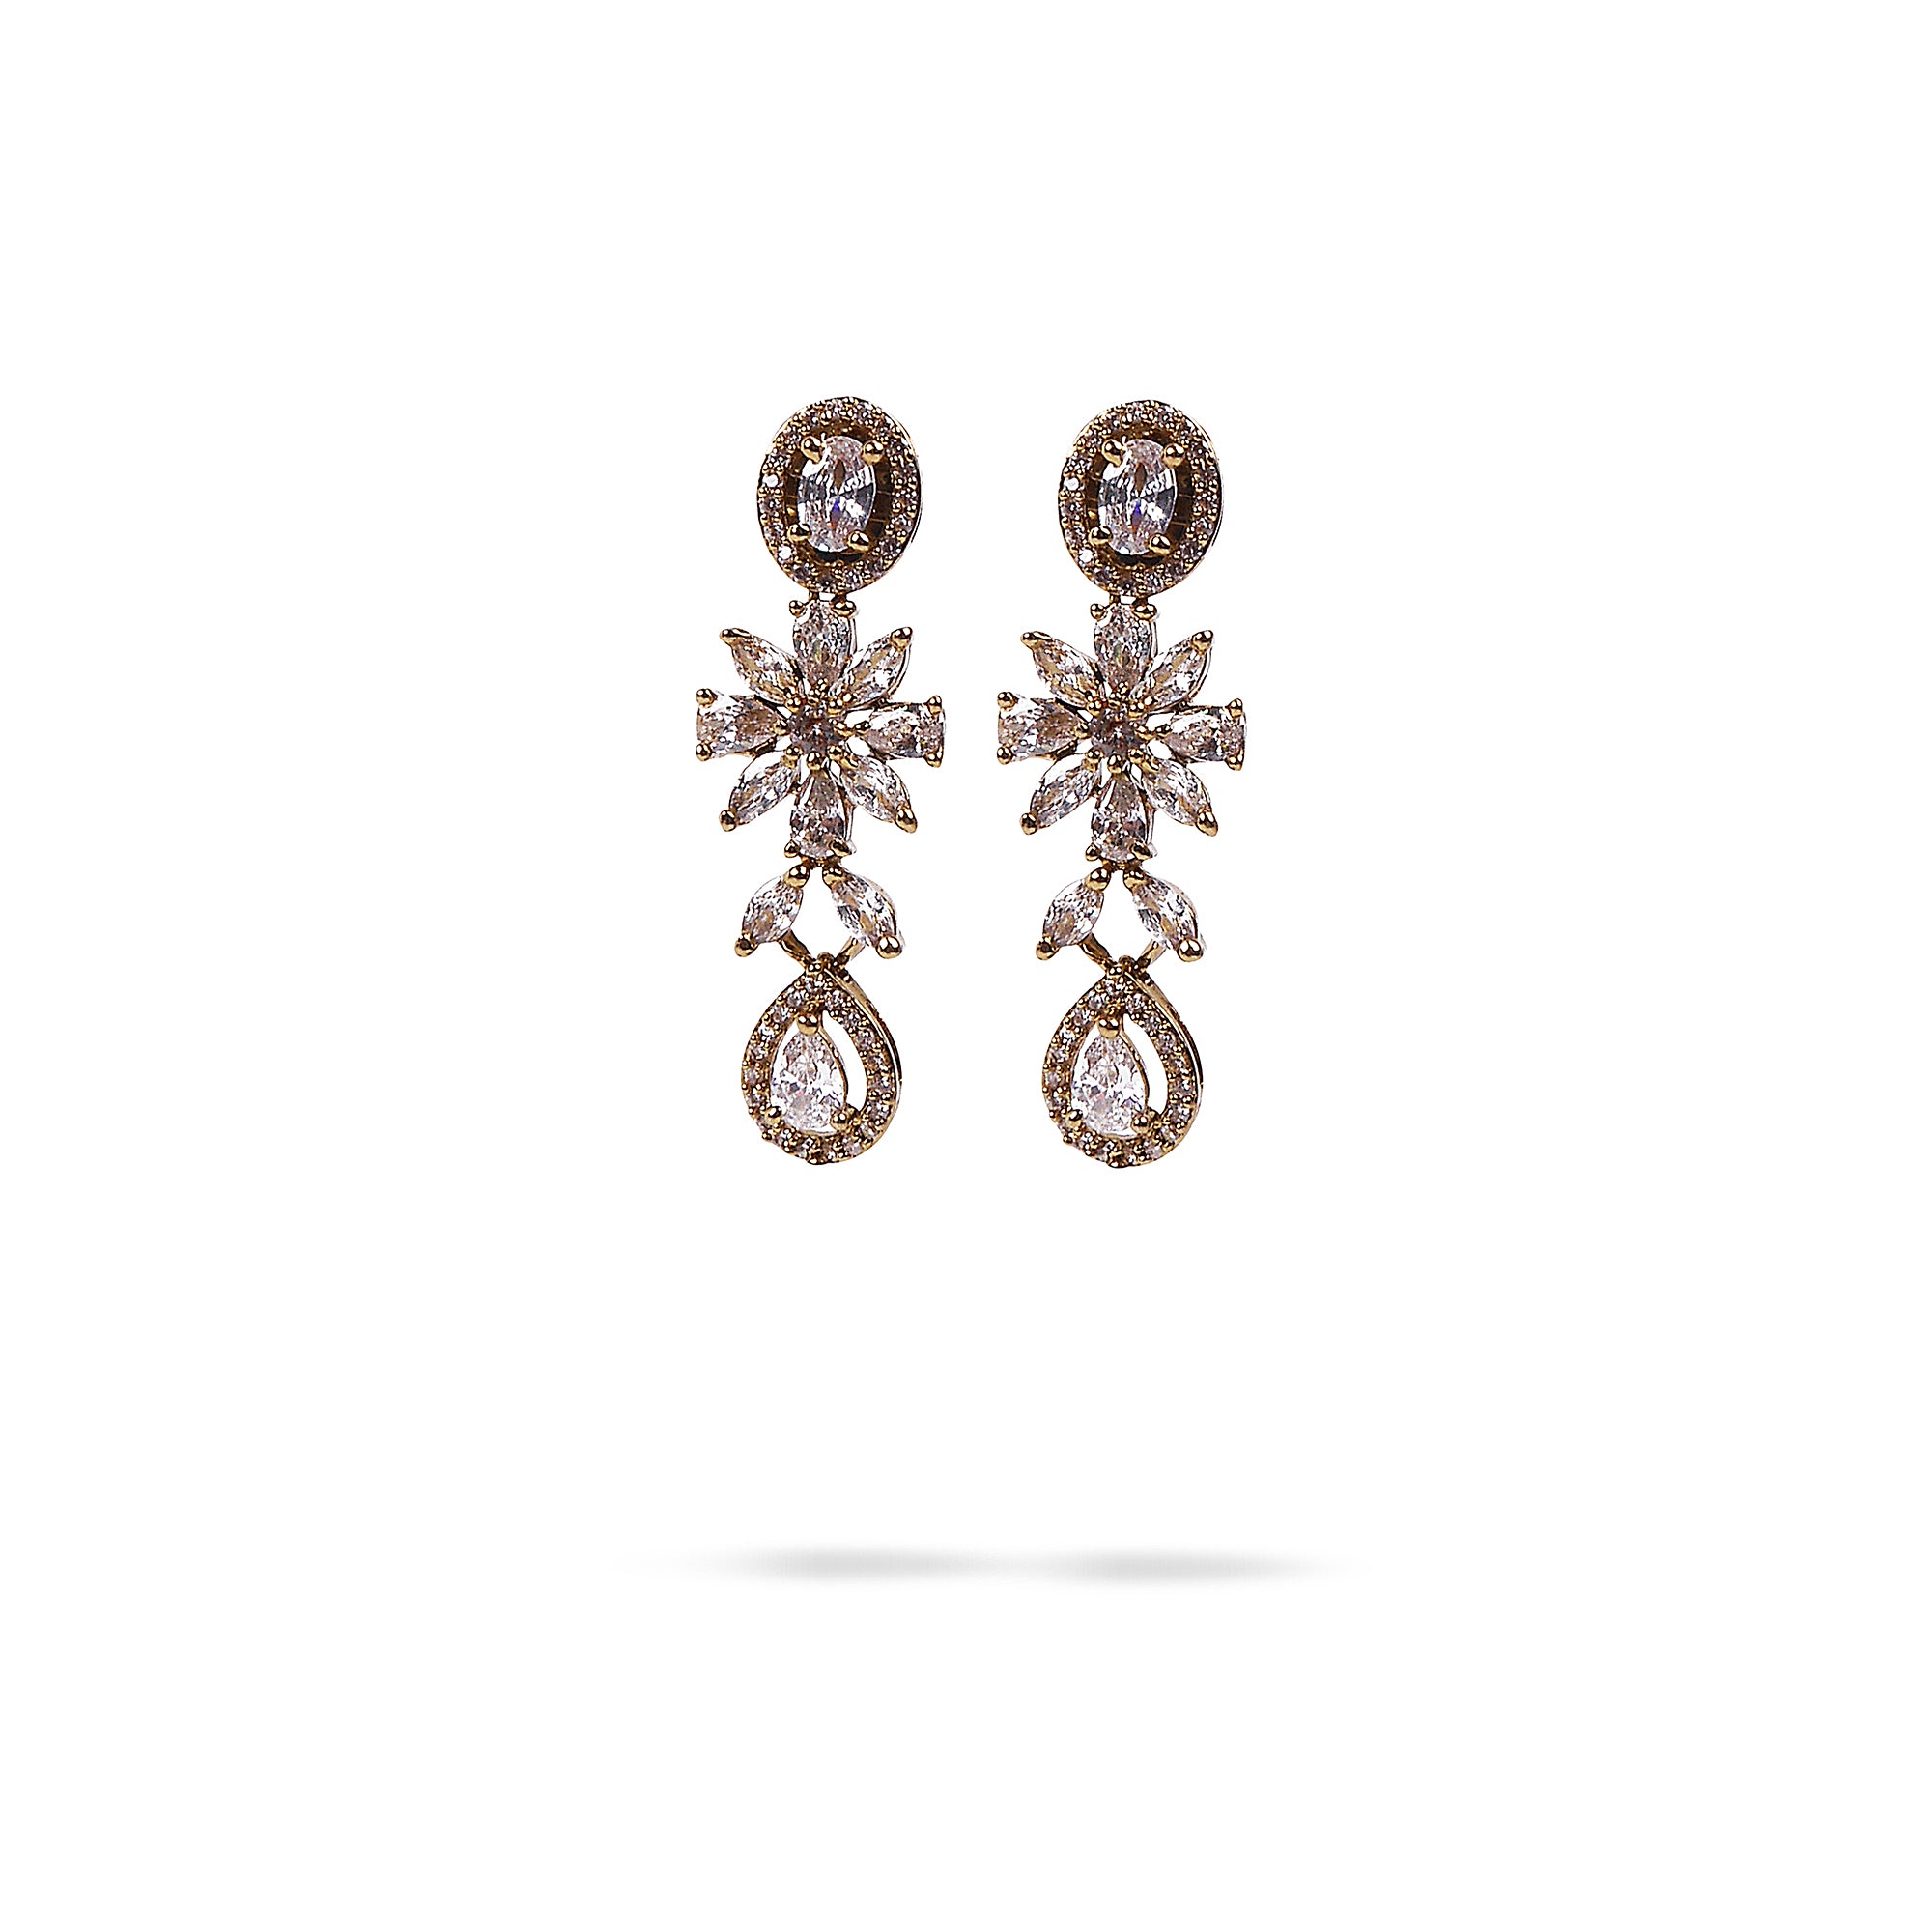 Floral Cubic Zirconia Earrings in White and Antique Gold